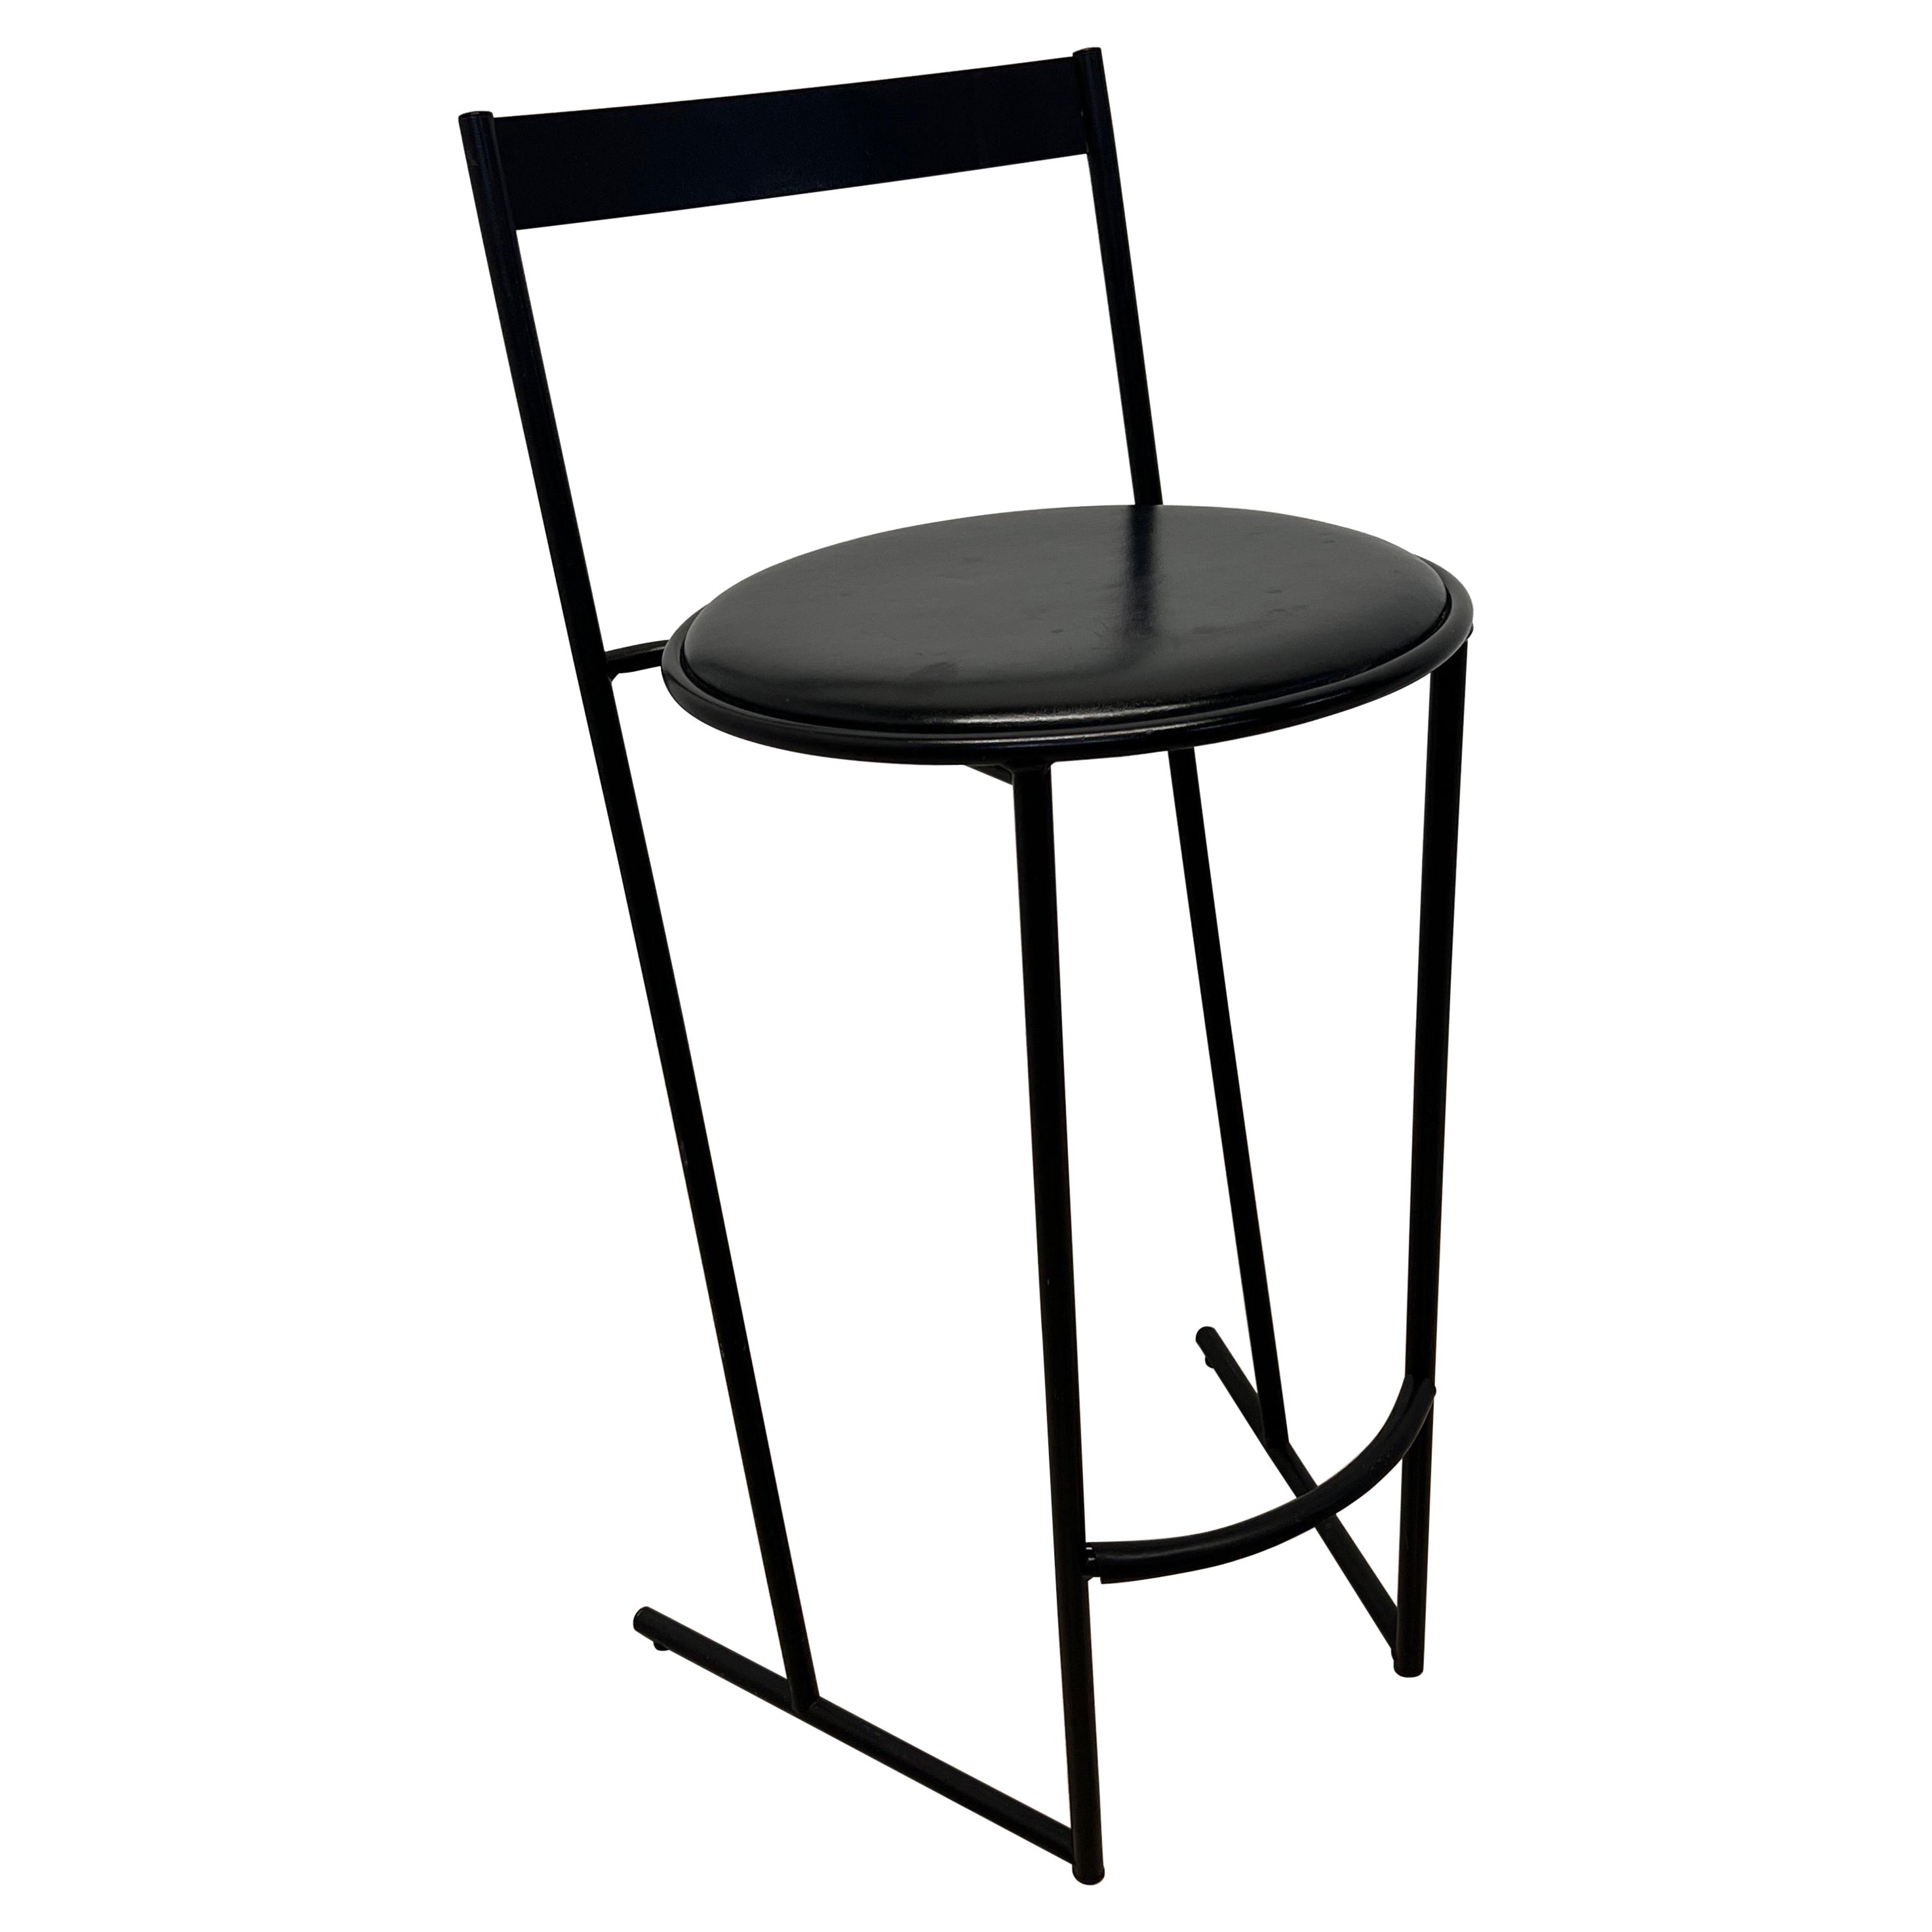 Emilio Nanni Musmé Counter Stool for Fly Line, 1984 For Sale